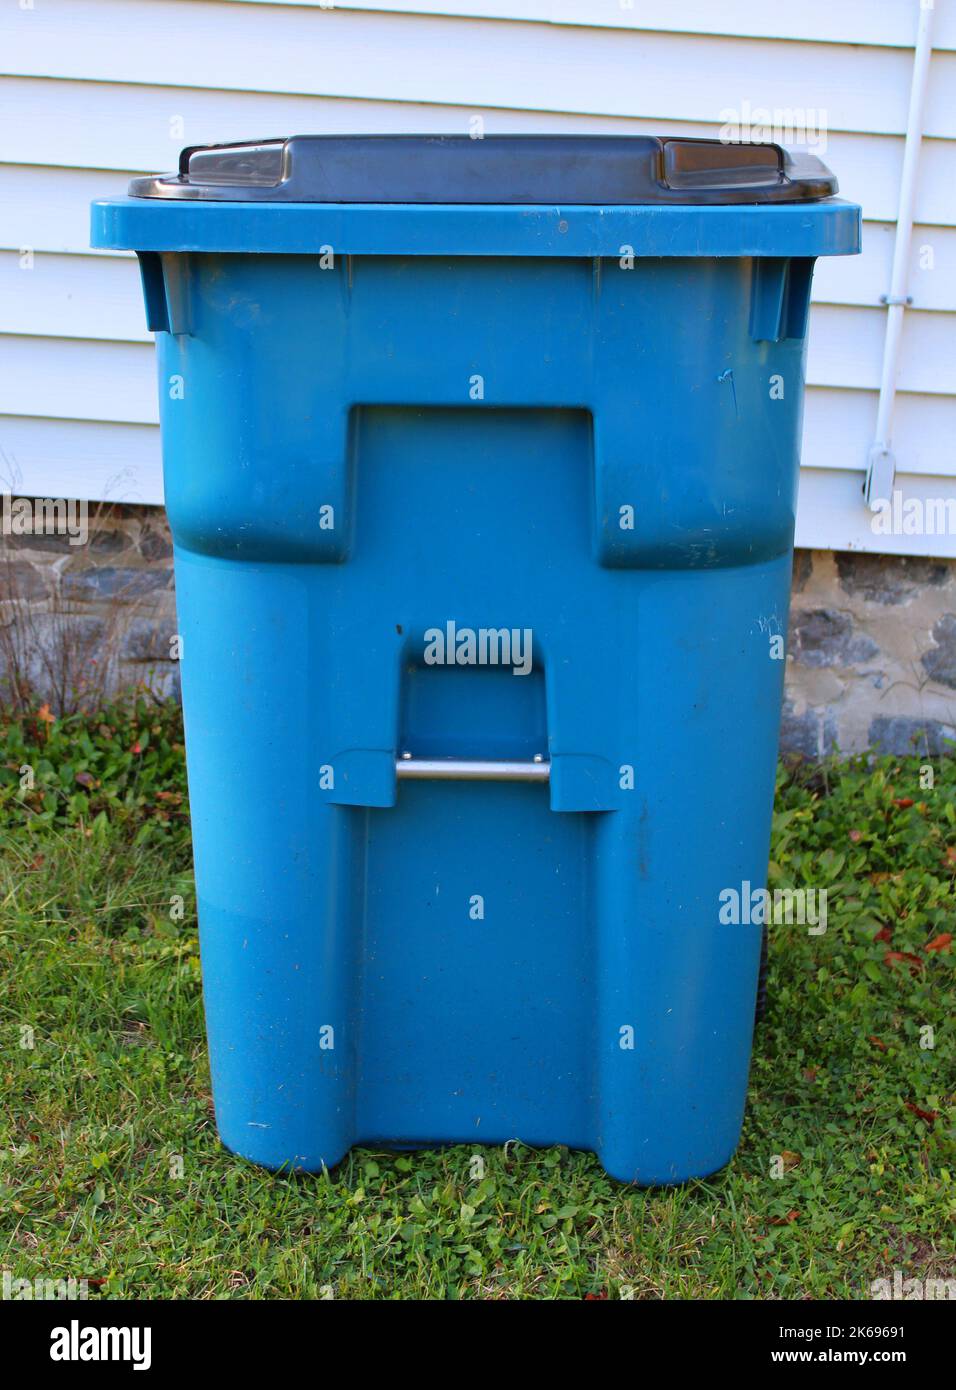 A Large Blue Plastic Trash Container Stock Photo